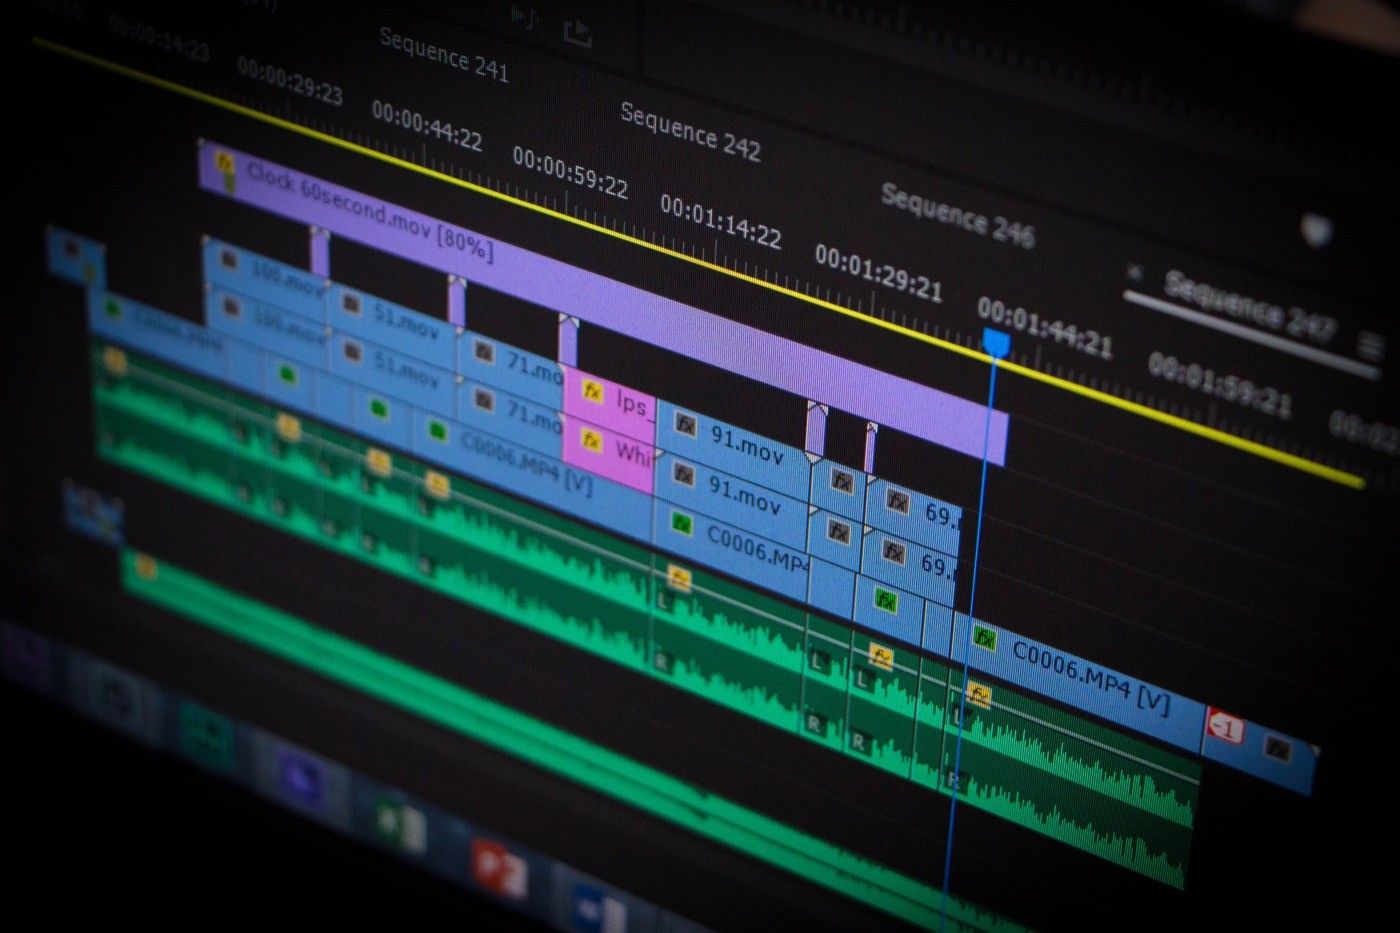 Simple Yet Essential: 11 Premiere Pro Tricks To Improve Your Editing Skills